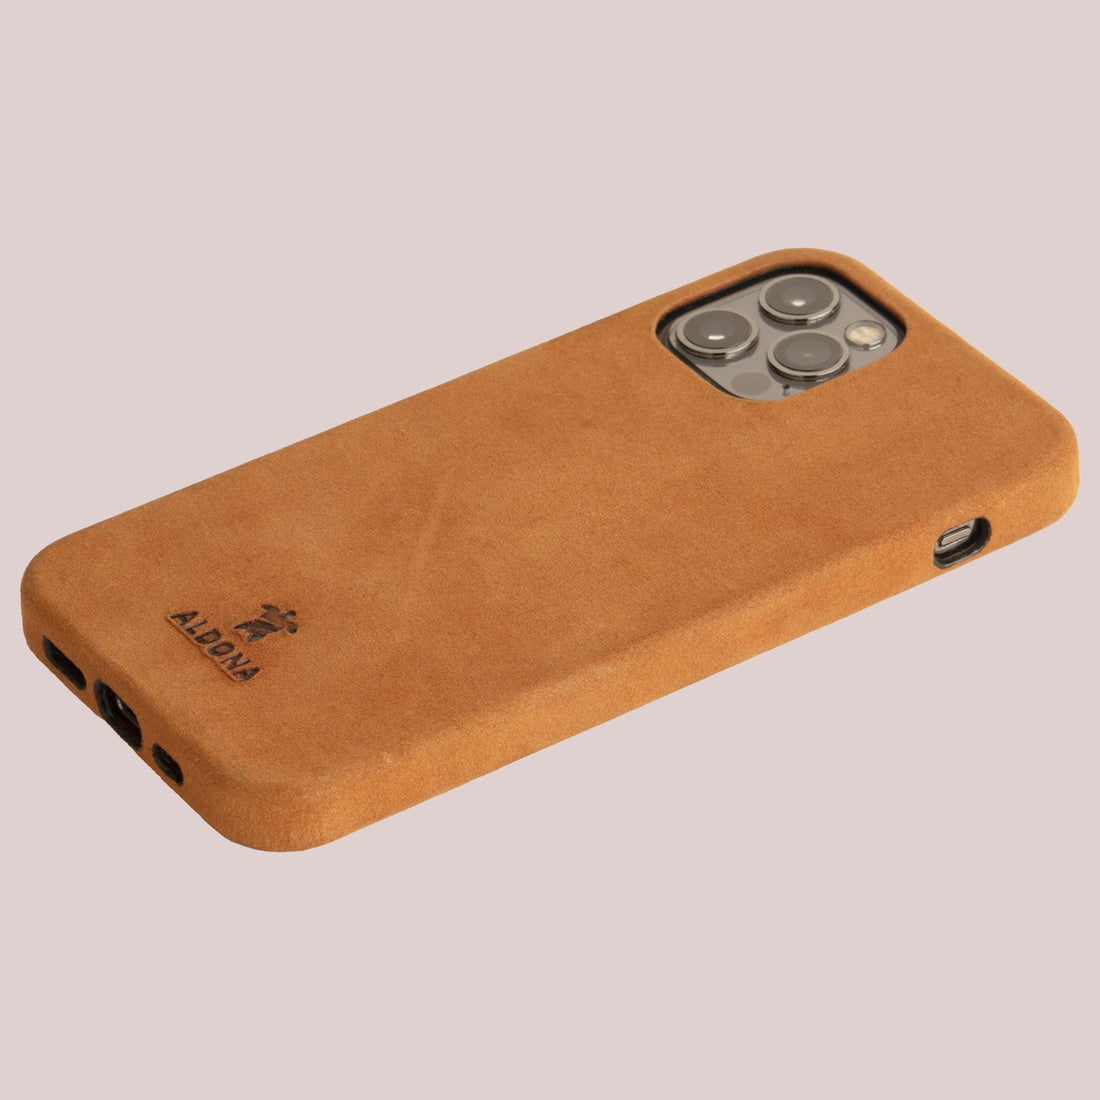 Kalon Case for iPhone 14 Pro with MagSafe Compatibility - Burnt Tobacco